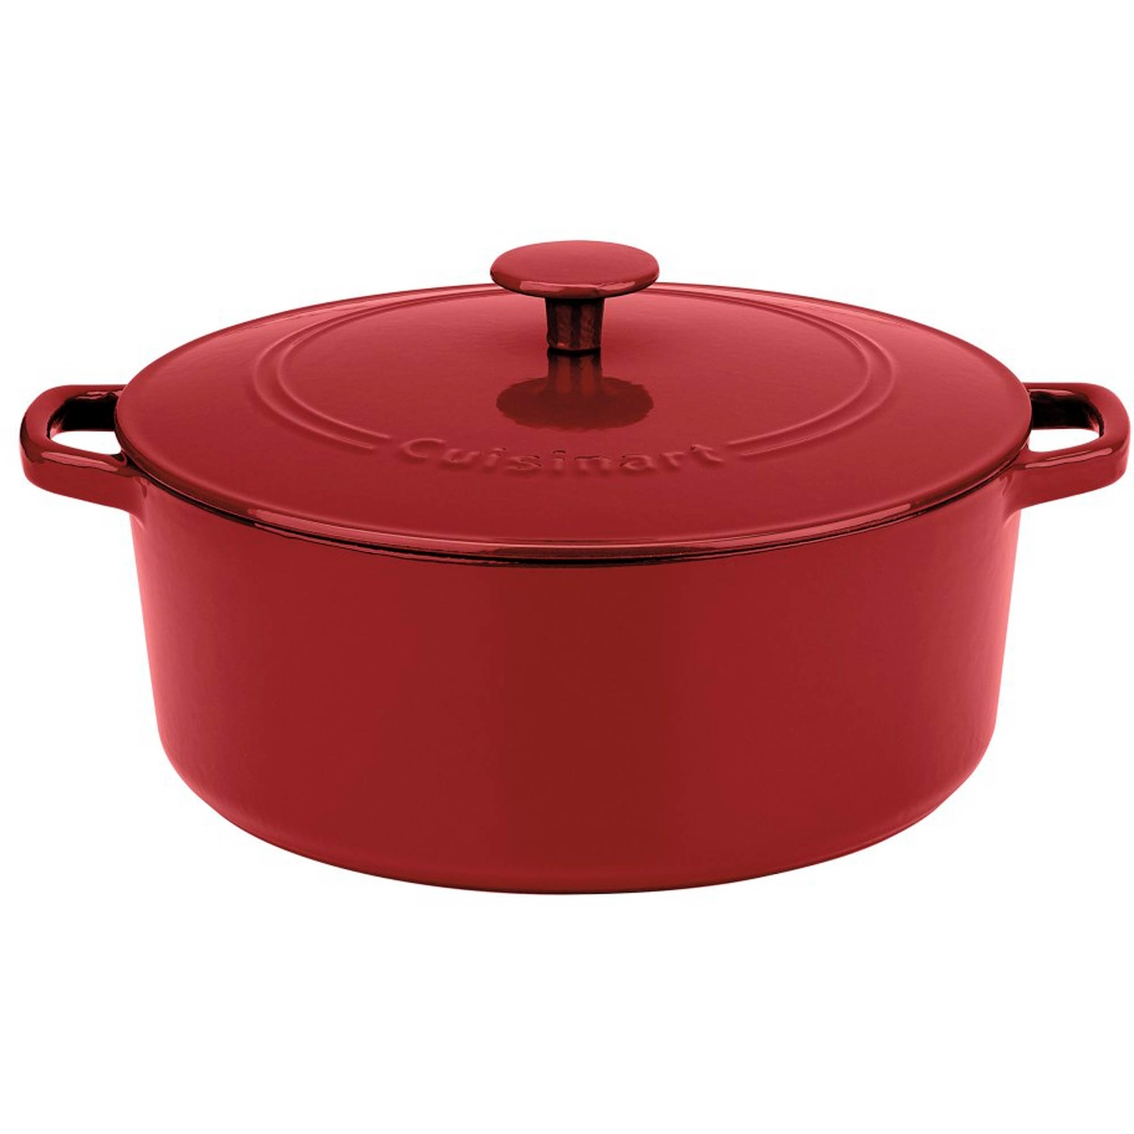  Cuisinart Chef's Classic Enameled Cast Iron 5-Quart Round  Covered Casserole, Cardinal Red: Dutch Oven Cast Iron Enamel: Home & Kitchen